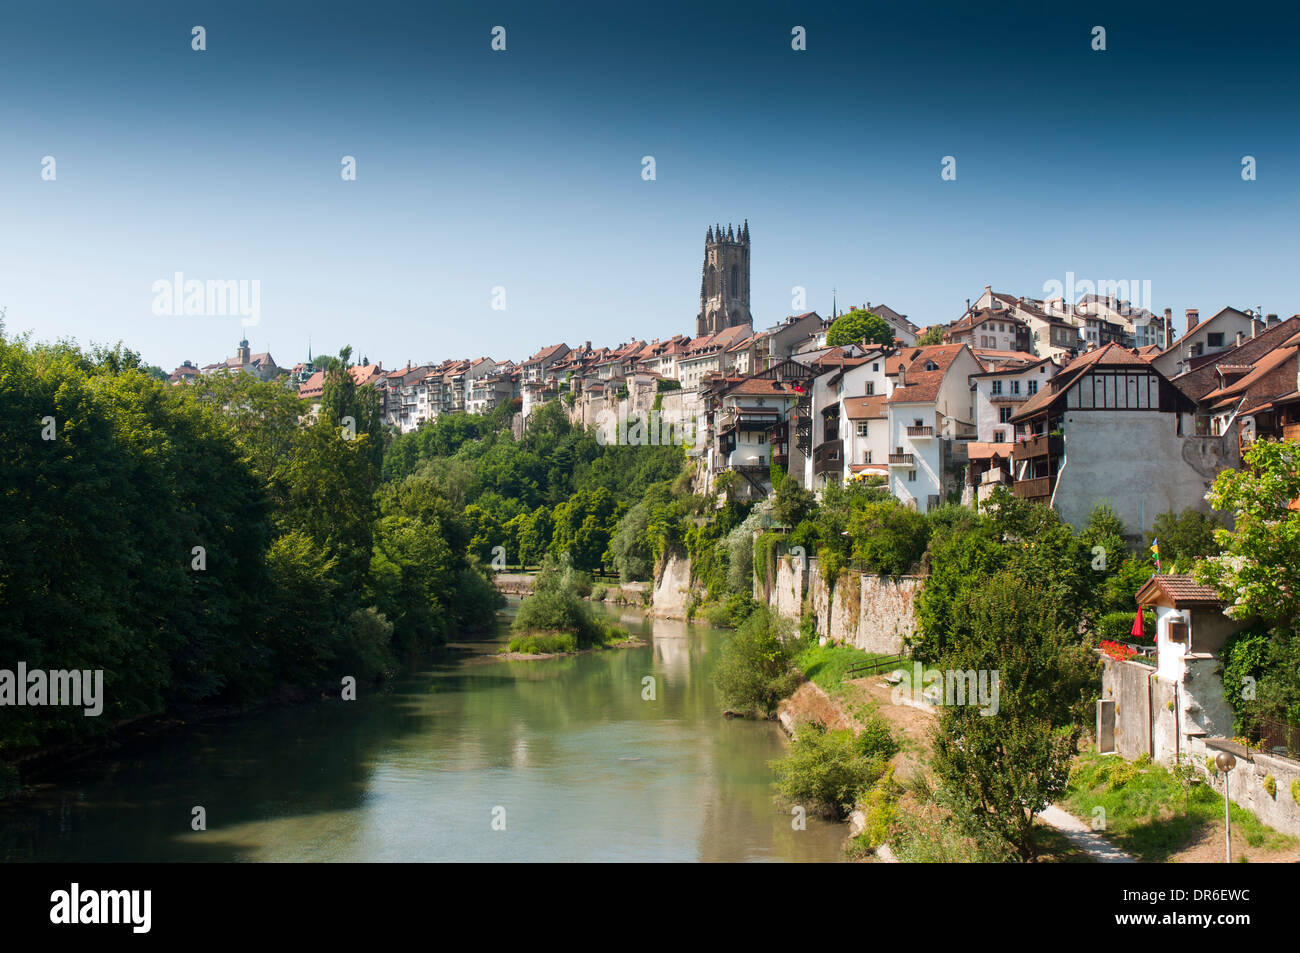 View of the old town of Fribourg from the Pont du Milieu across the river Saane / Sarine in Switzerland Stock Photo